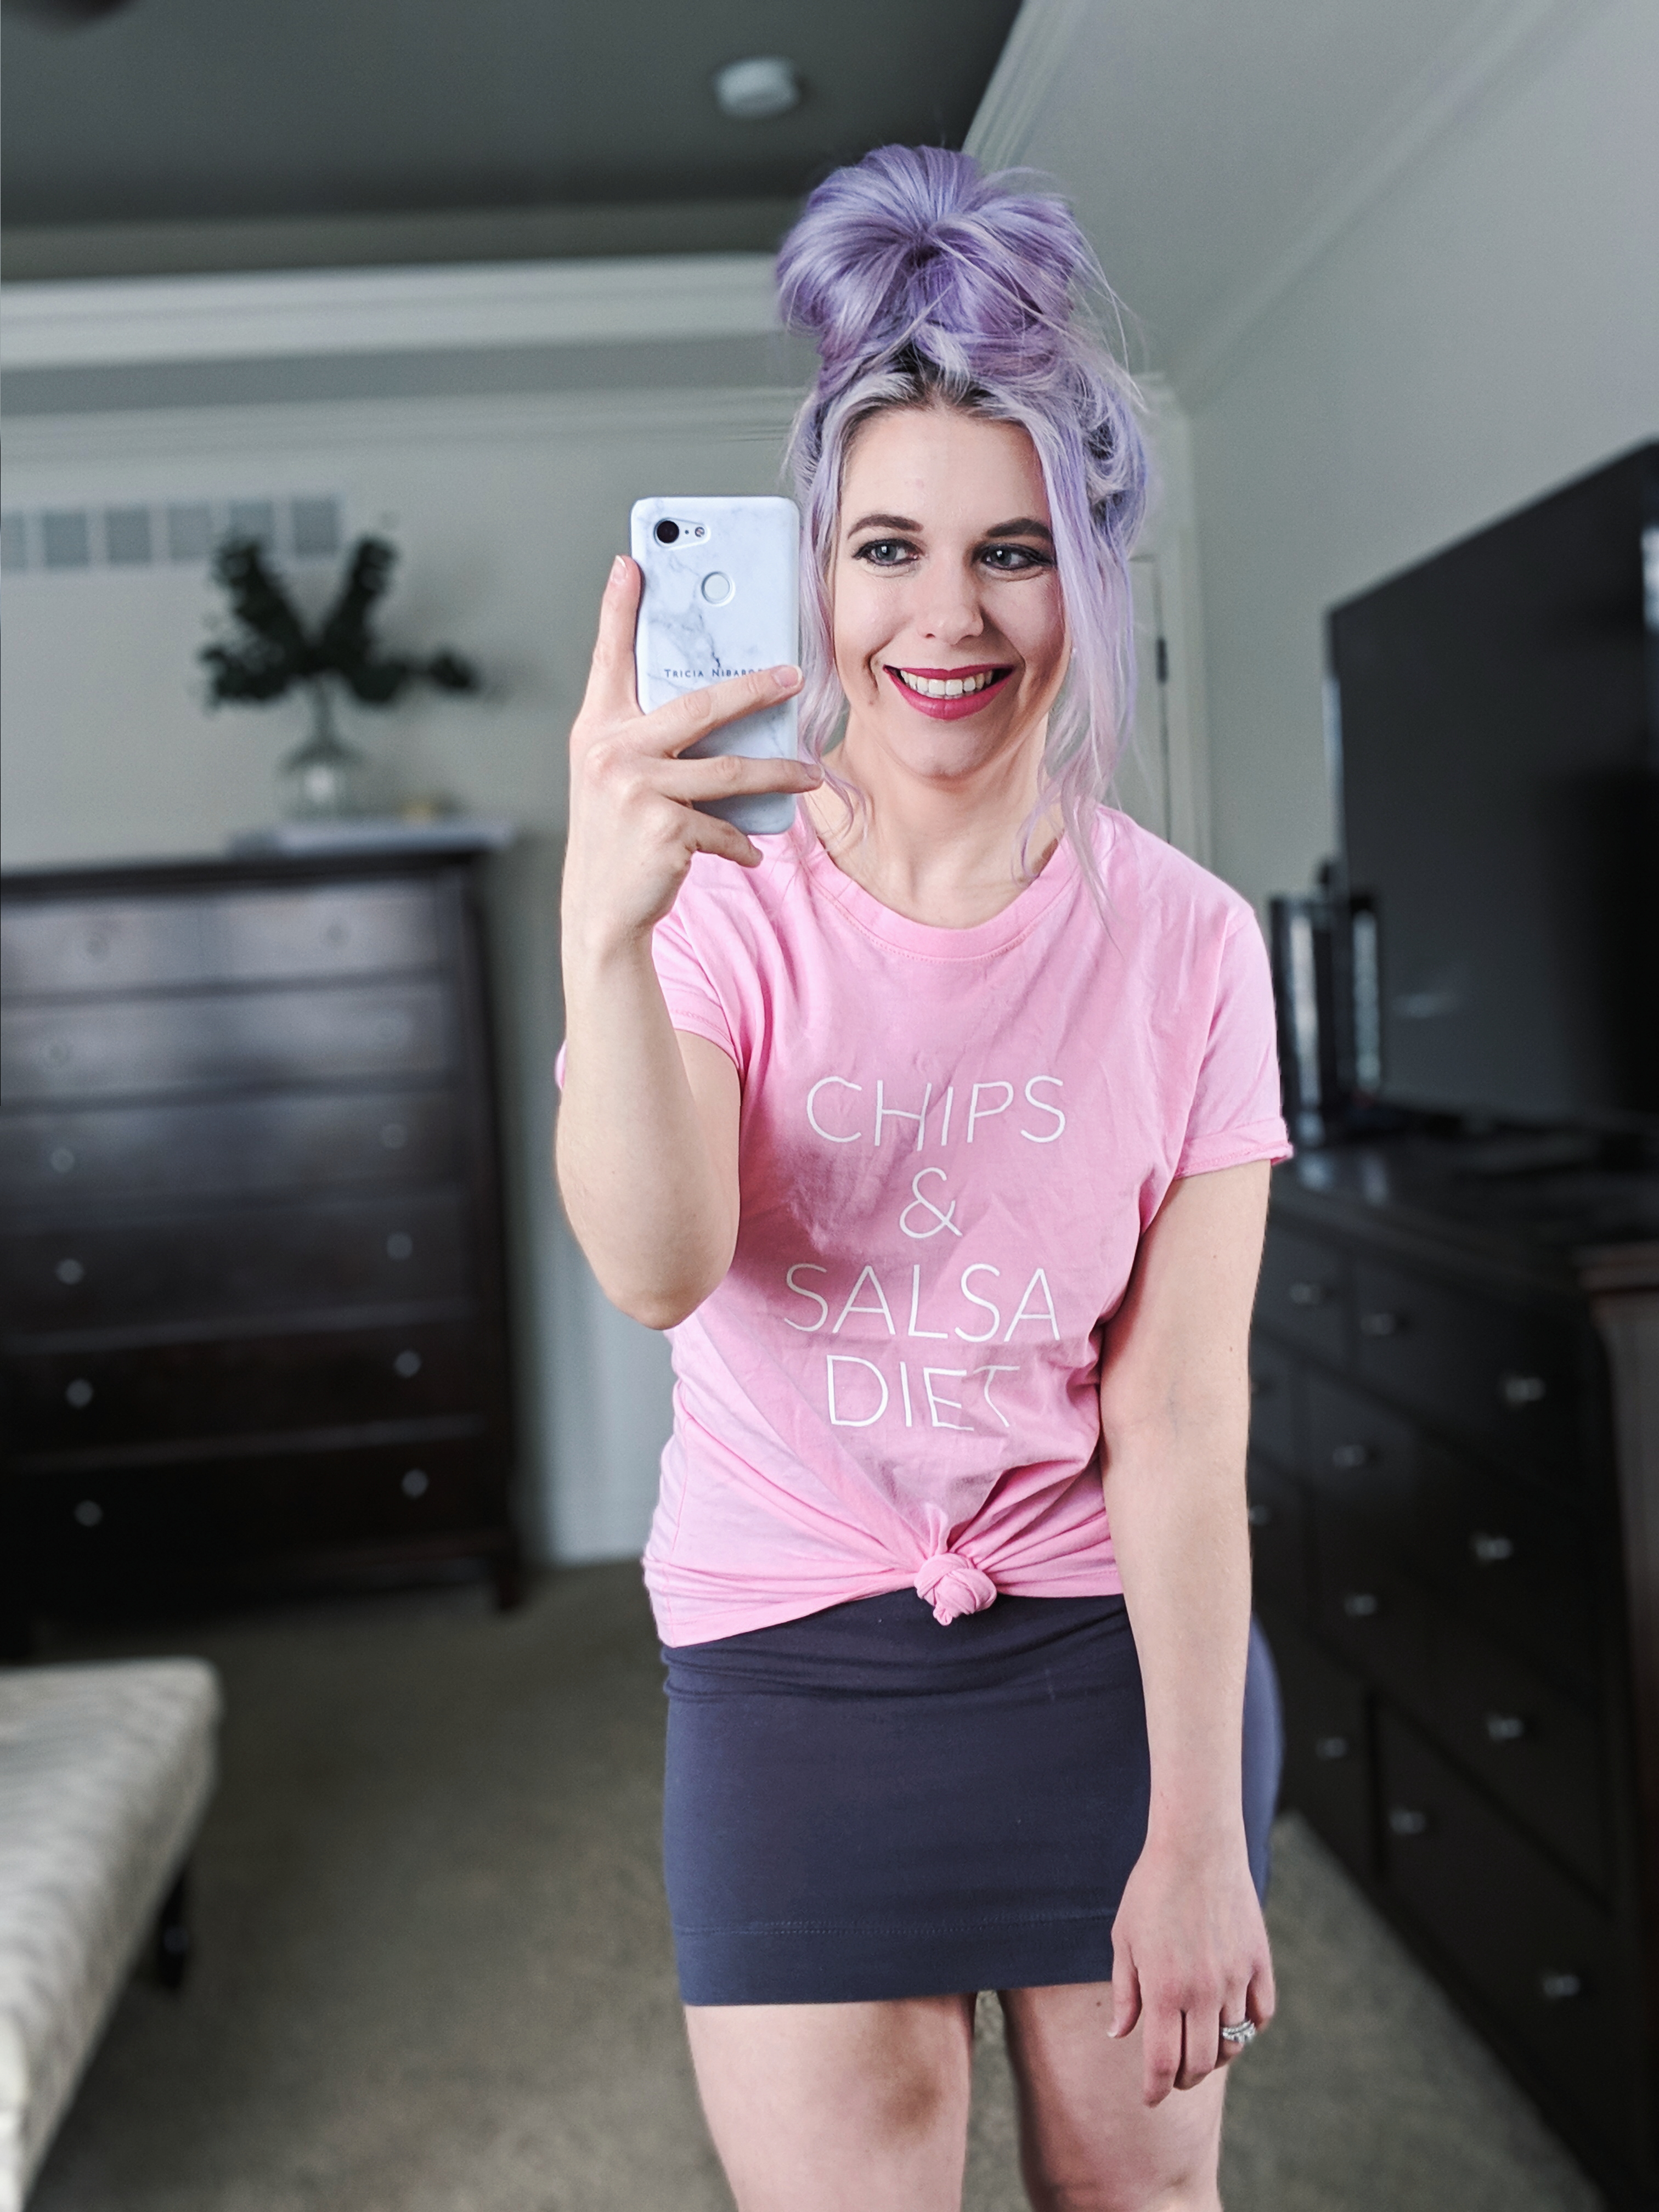 Amazon Try On Haul April 2019: Spring 2019 Amazon try-on haul by petite fashion blogger Tricia Nibarger of COVET by tricia. Amazon try-on session featuring some of the top Amazon finds for 2019. #petitefashion #petitestyle #amazonfinds #tryonhaul 